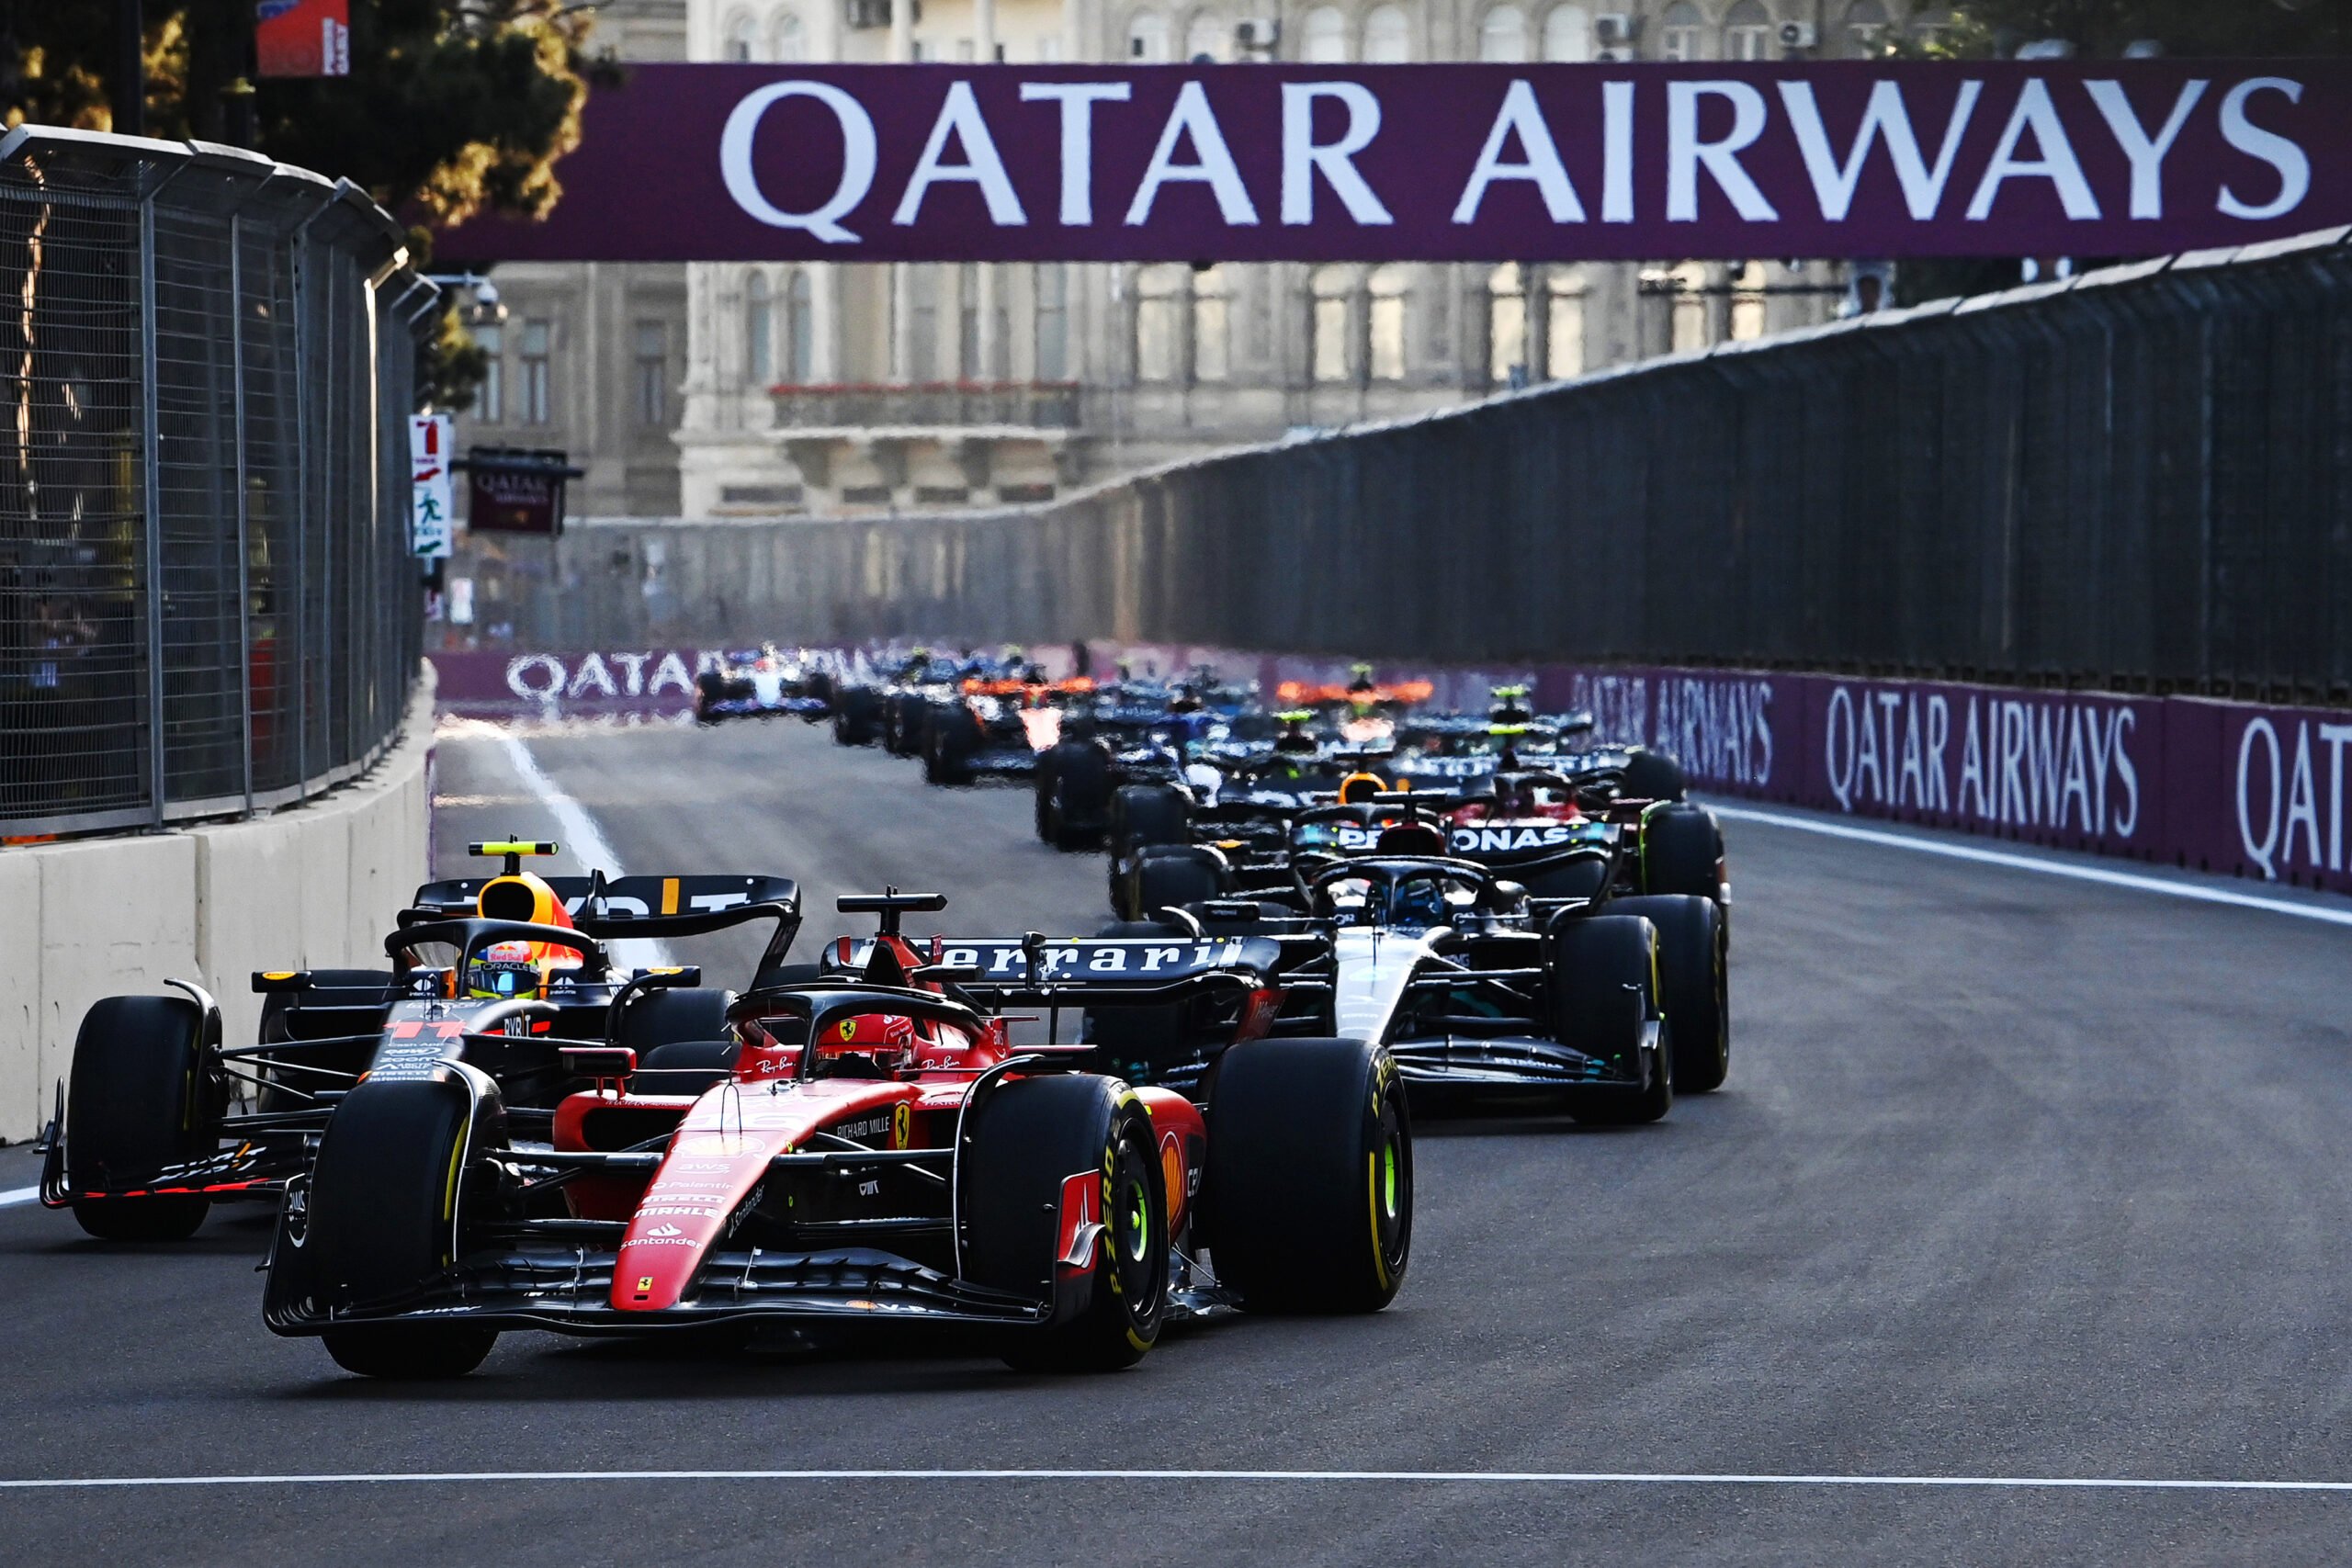 Qatar Airways is the official F1 airline partner